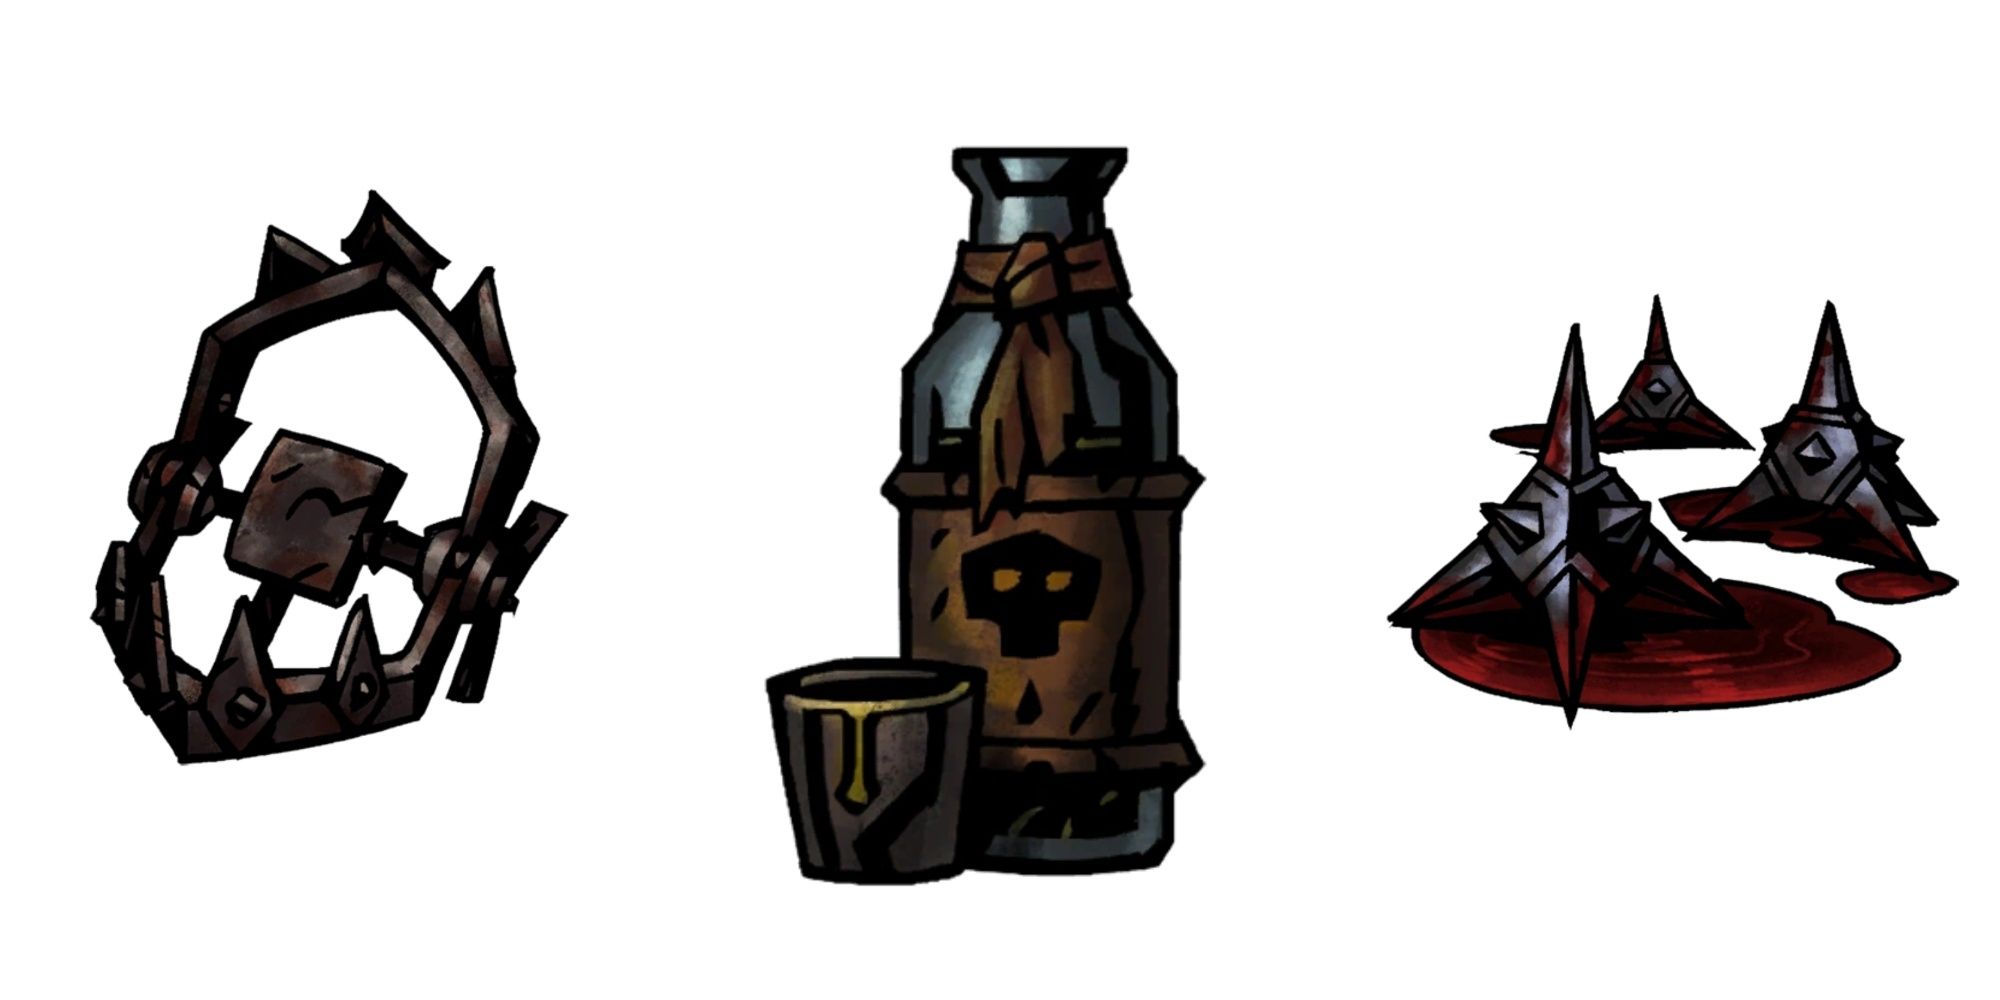 The items Bear Trap, Laudanum, and Crows Feet from Darkest Dungeon 2